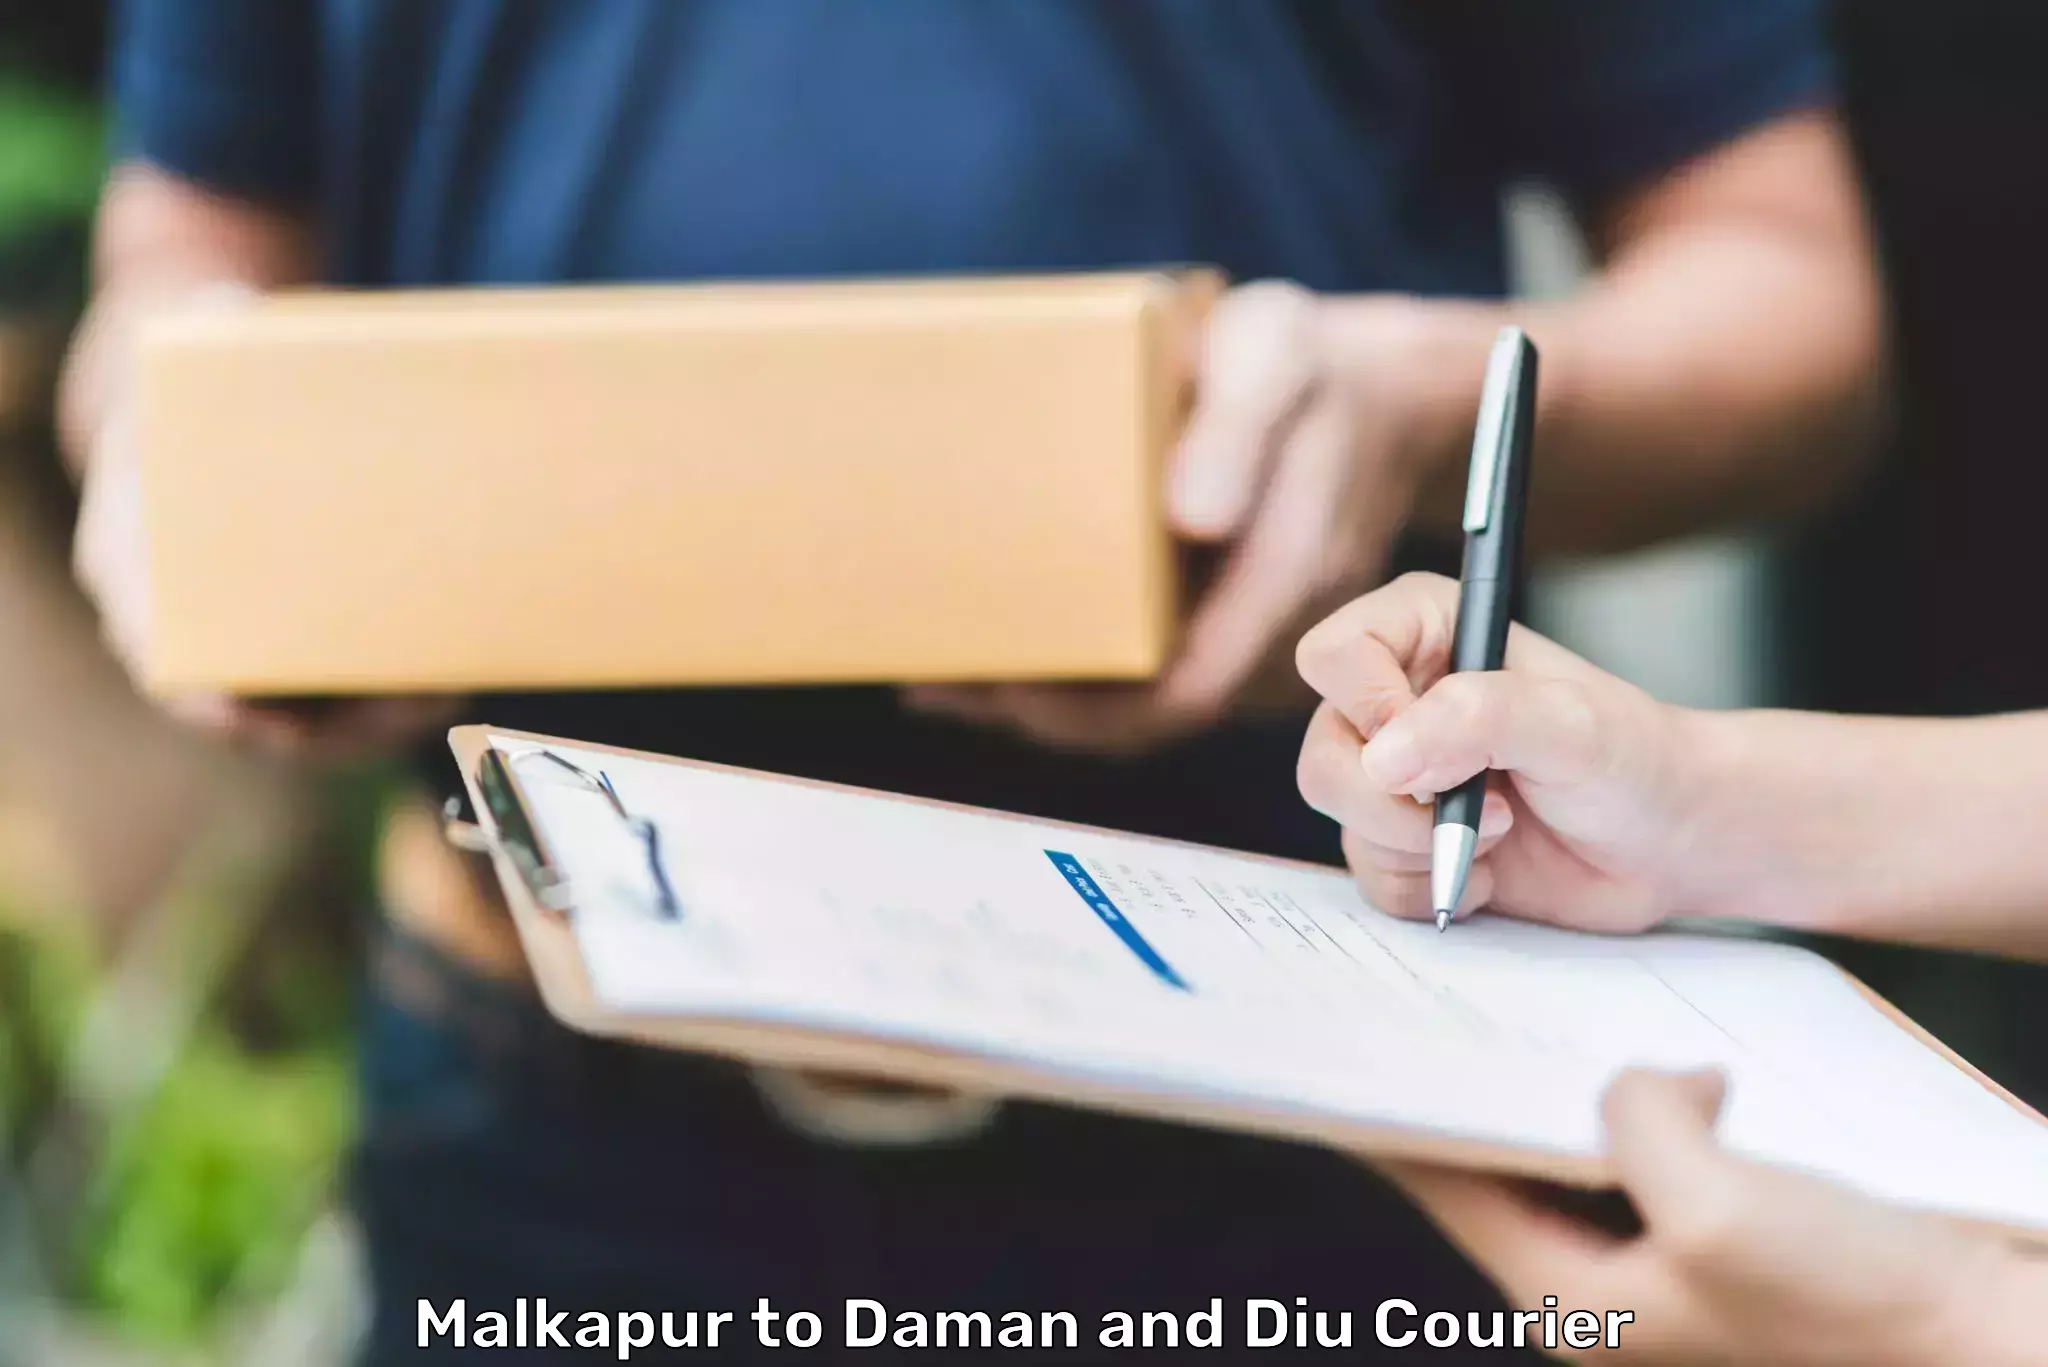 Express delivery capabilities in Malkapur to Daman and Diu